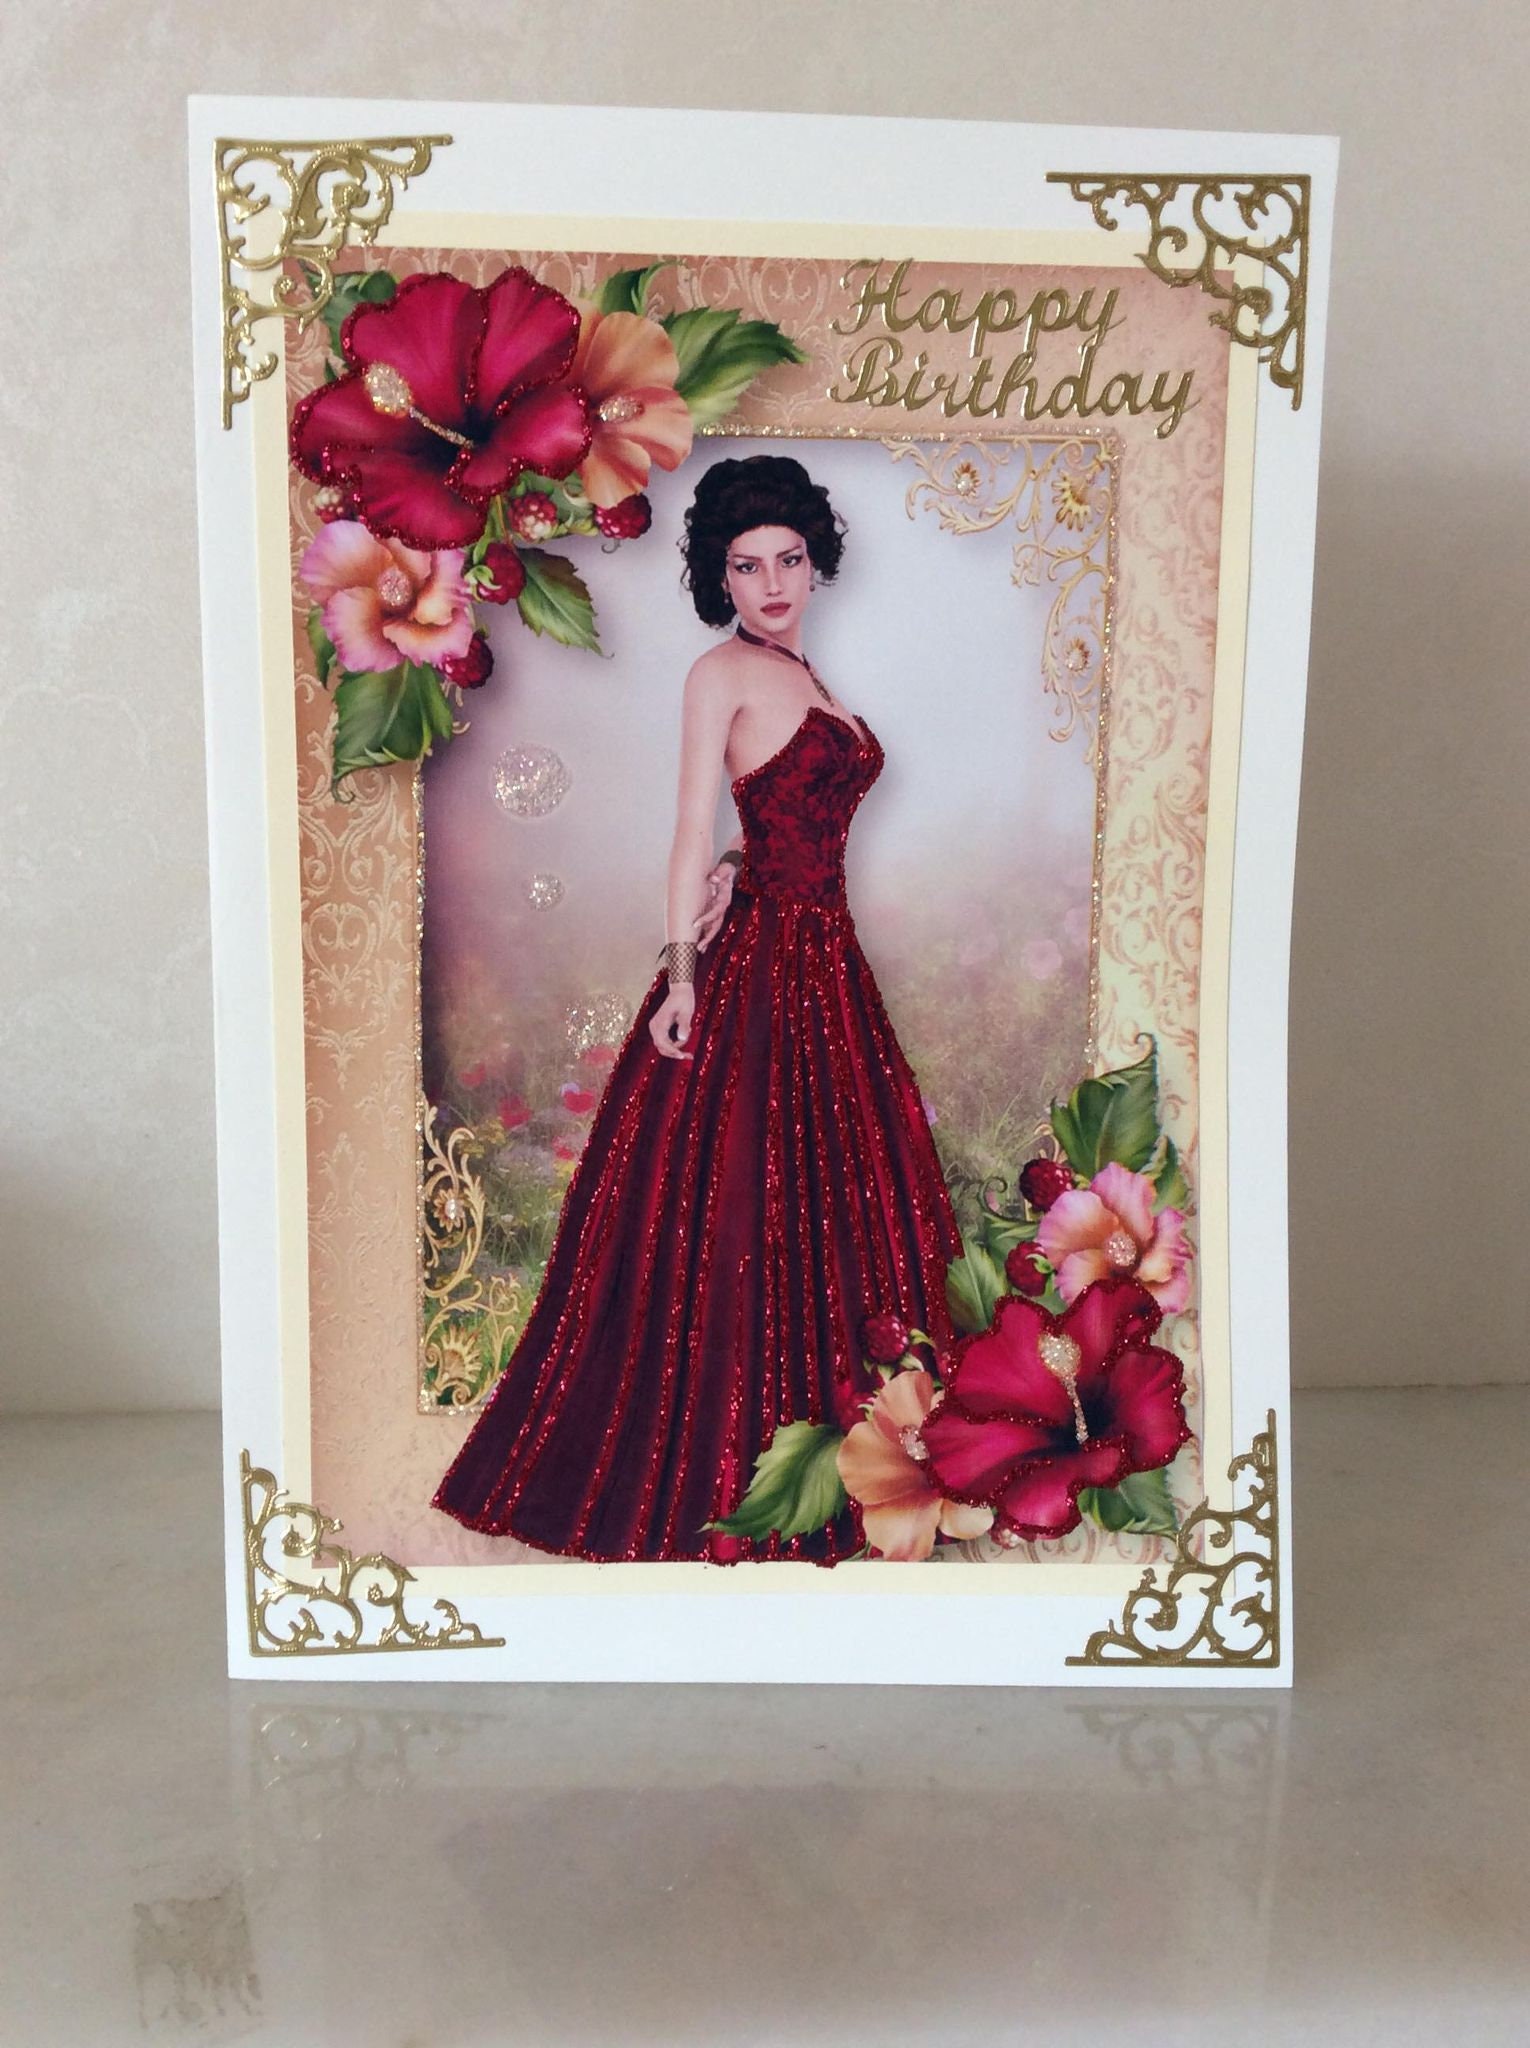 Luxury Birthday card Ladies Design Greeting card for her | Etsy